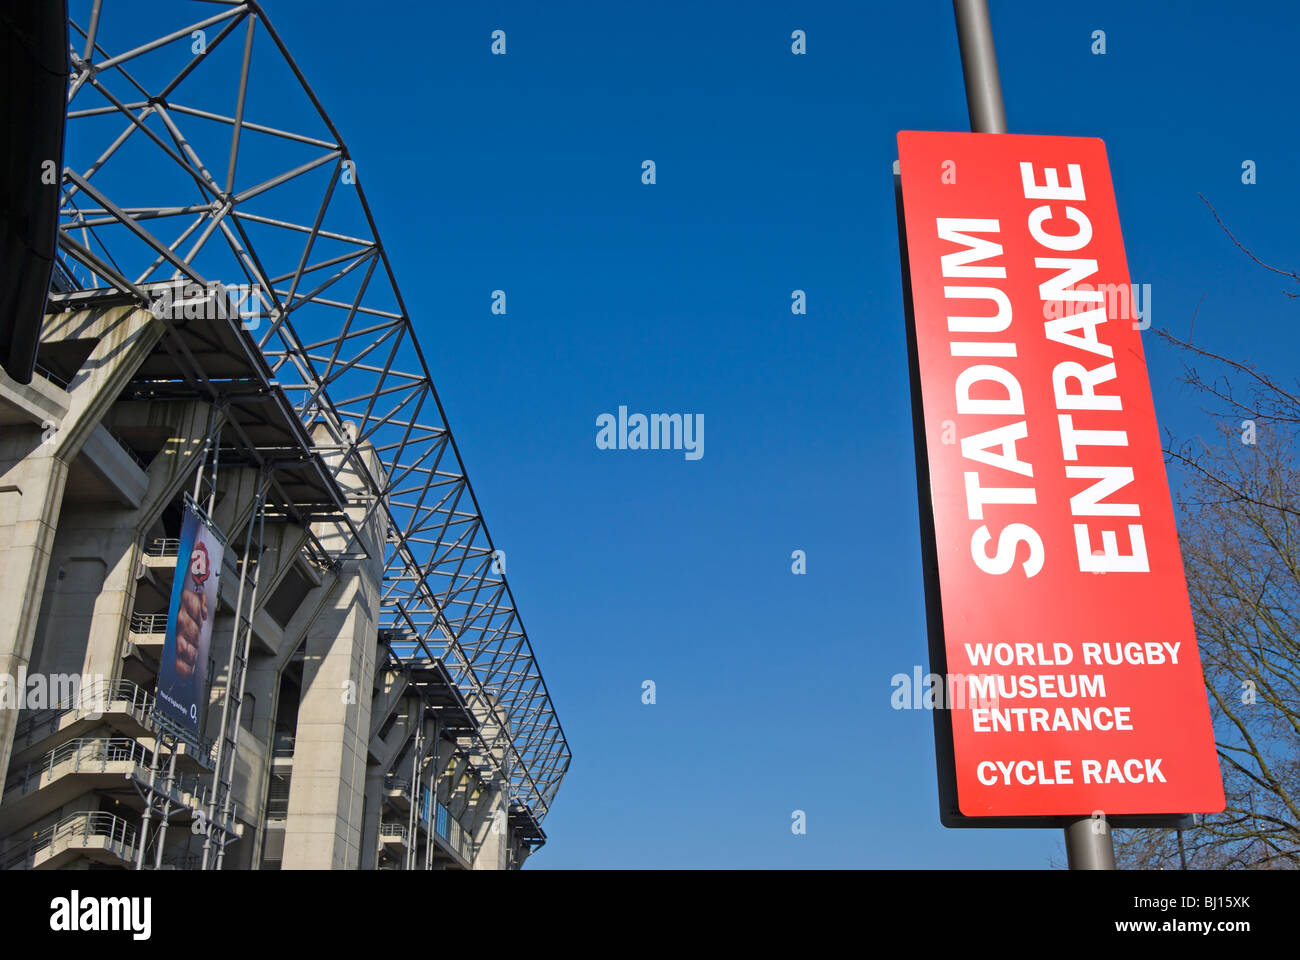 sign for stadium entrance, world museum of rugby and cycle rack, at twickenham stadium, twickenham, middlesex, england Stock Photo